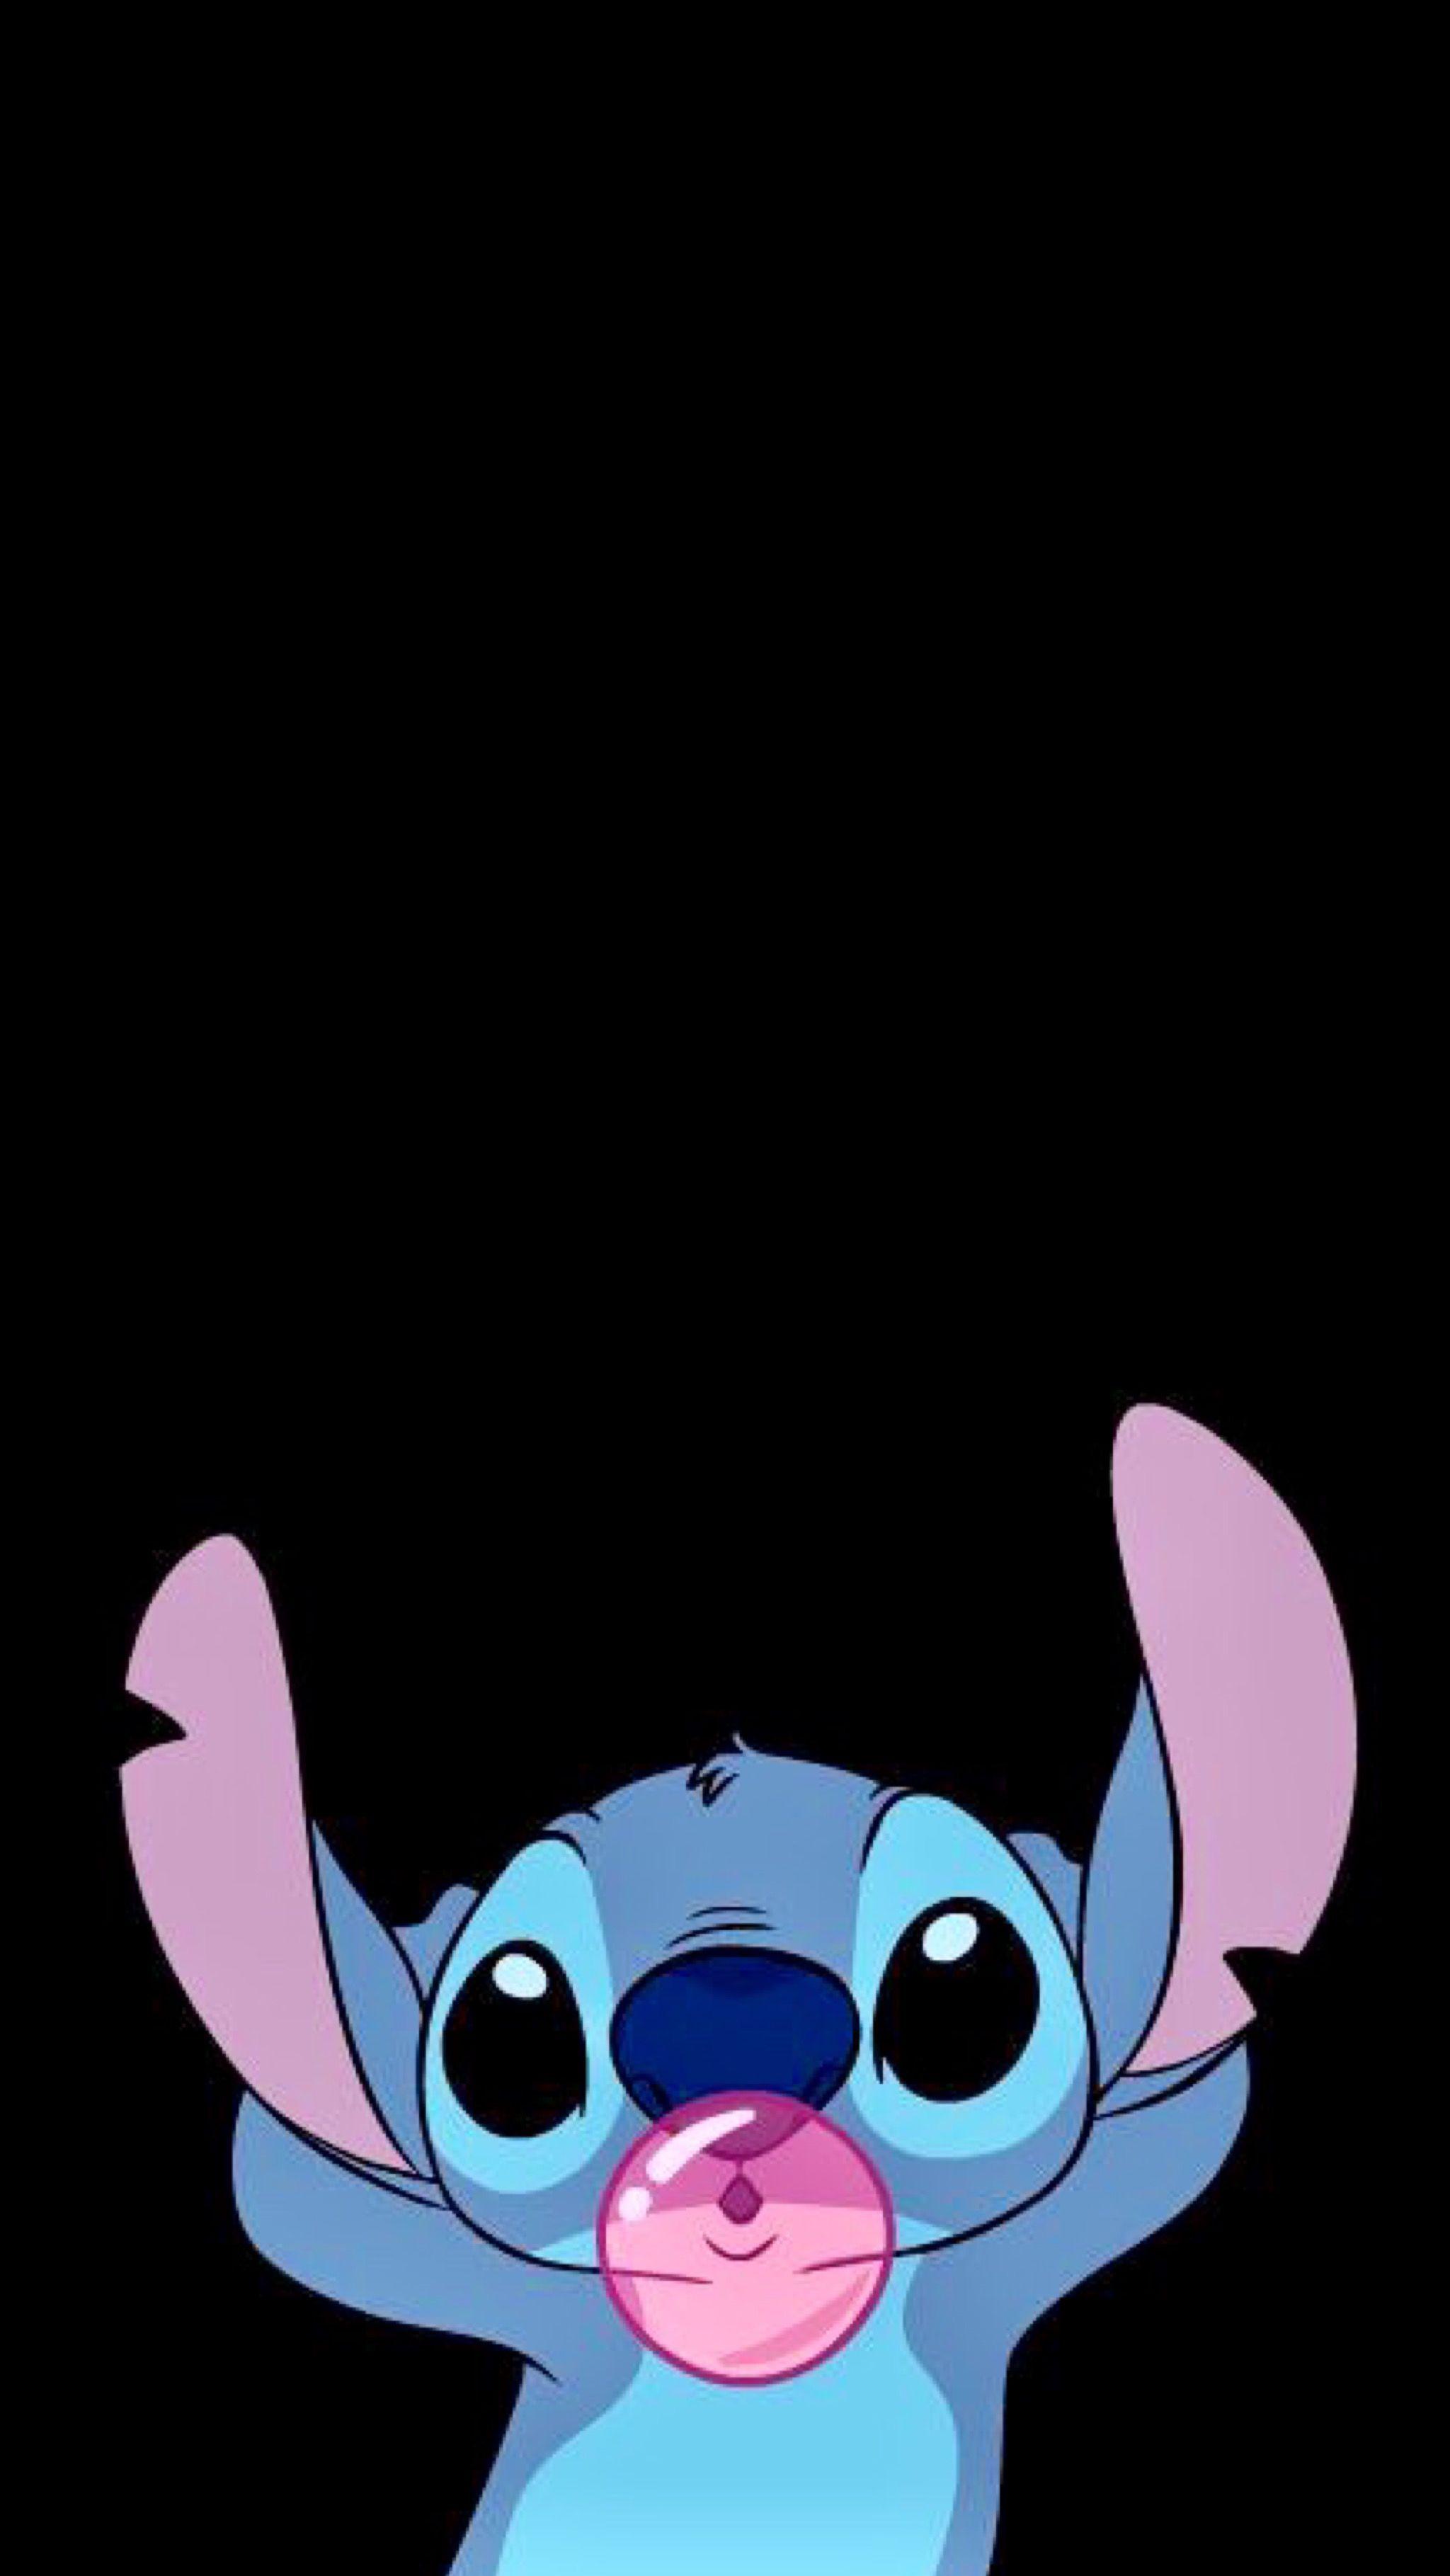 Cute Wallpaper iPhone Disney Stitch for Your iPhone